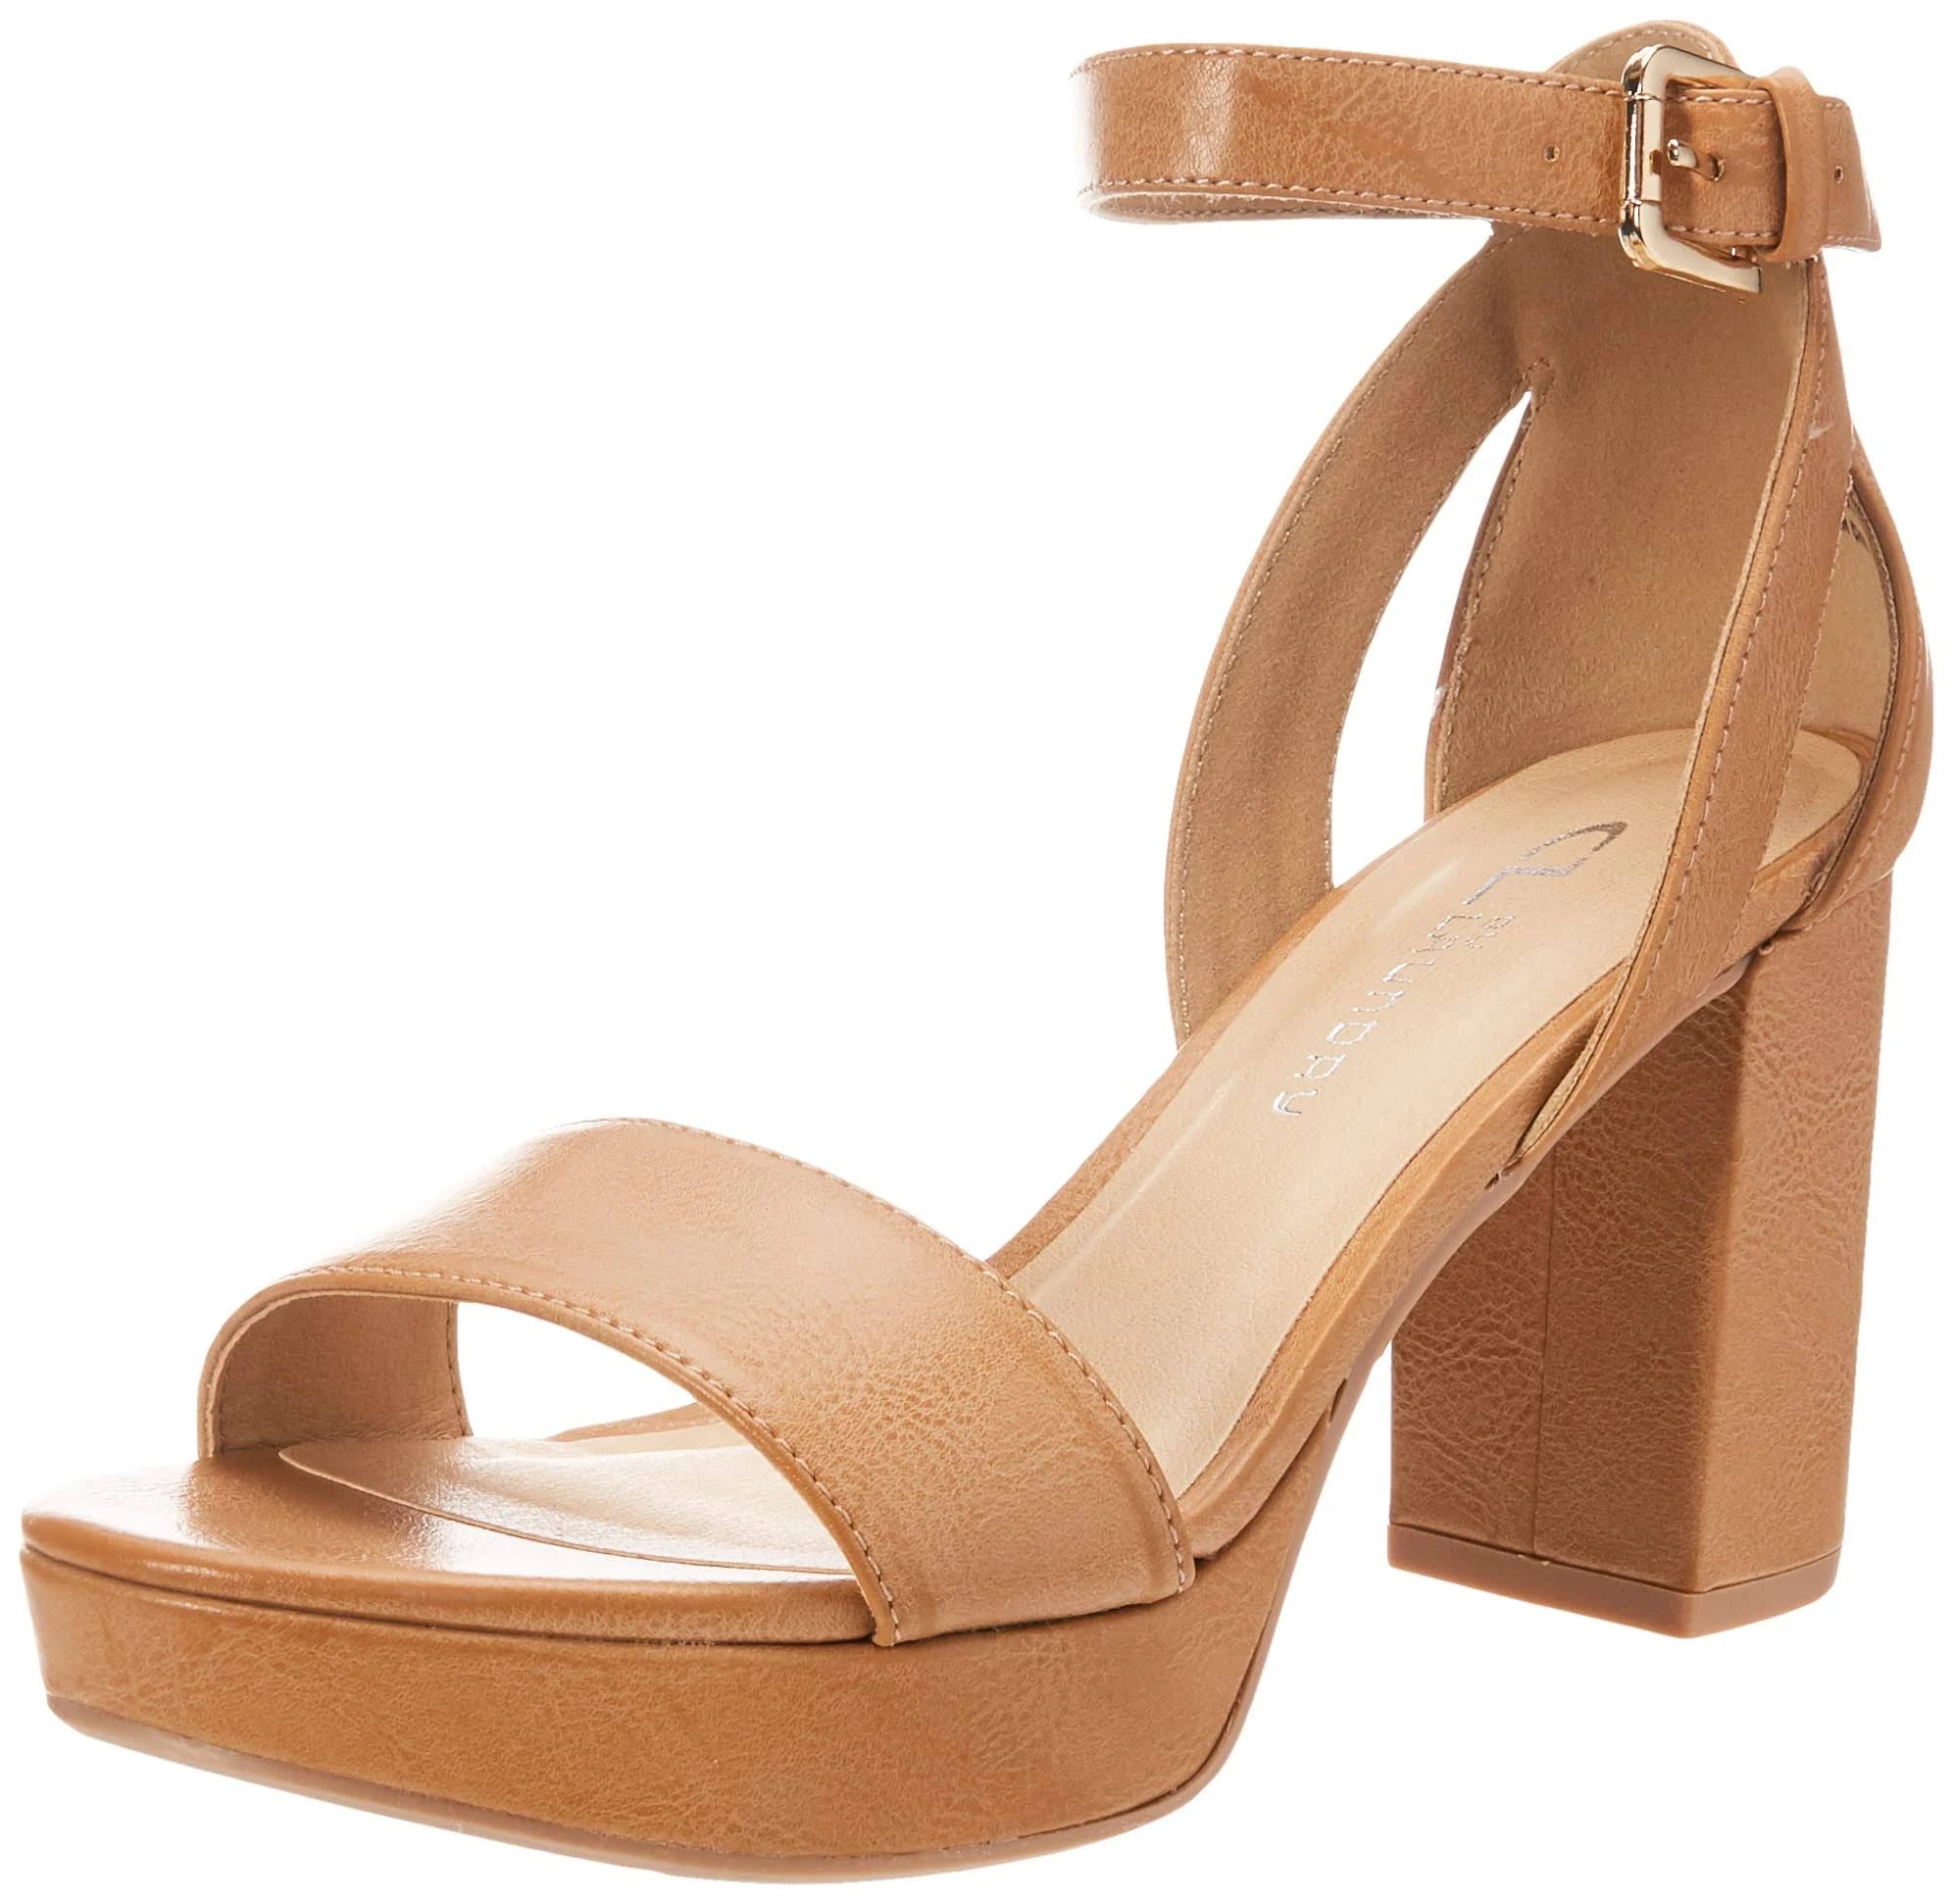 Trendy Ankle Strap Pumps in Nude Shade | Image